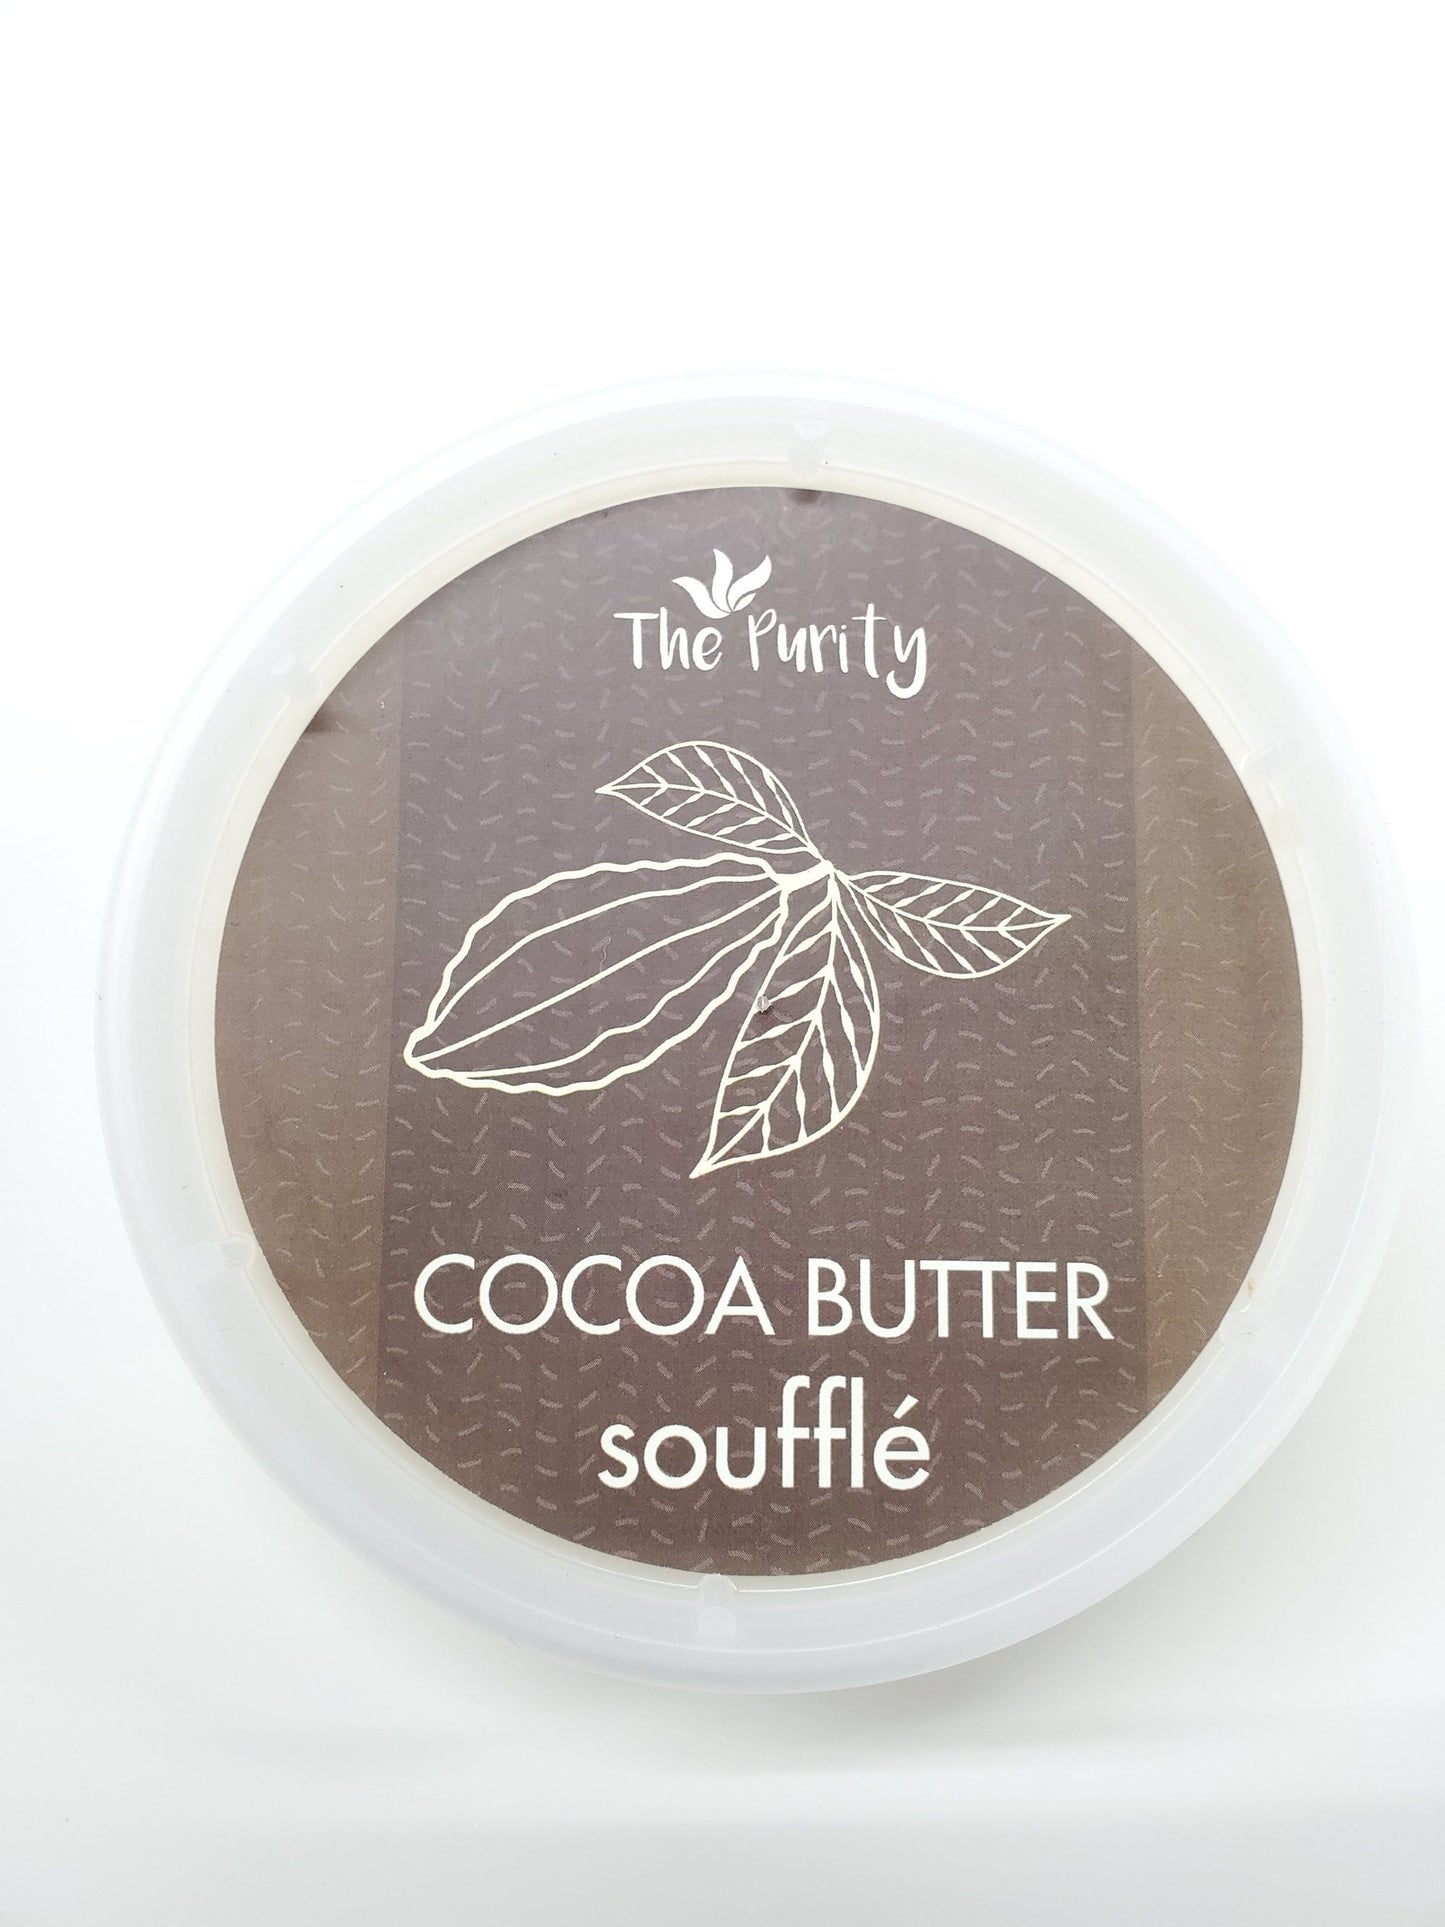 The Purity: Cocoa Butter Soufflé